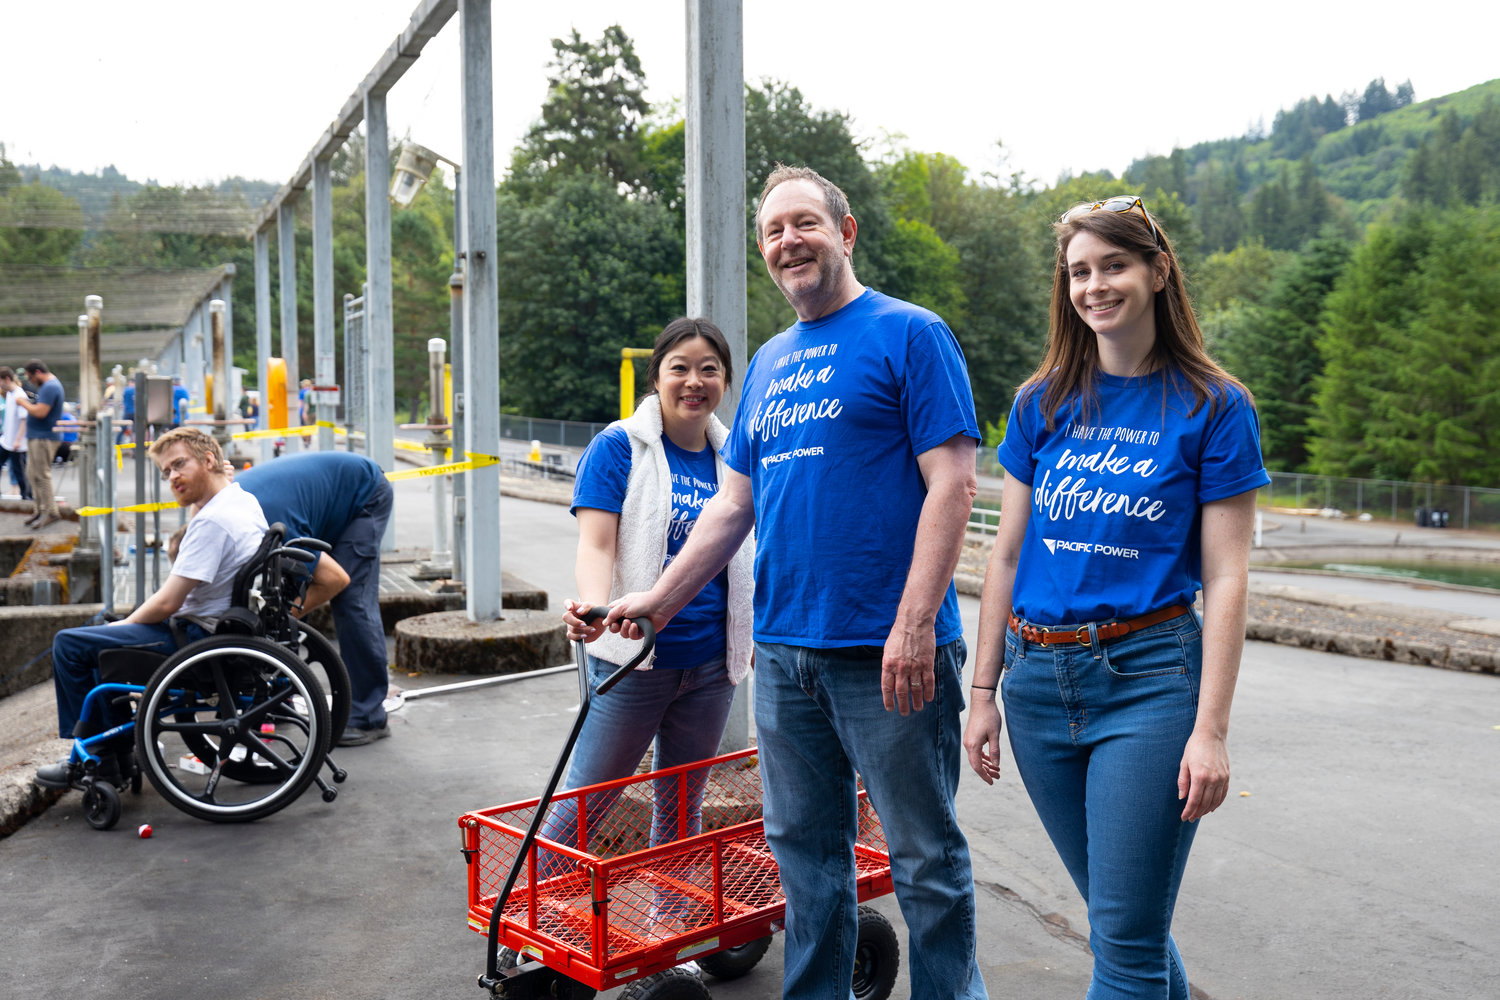 Volunteers pose with a wagon at the annual Merwin Special Kids Day event at the Merwin Fish Hatchery in Woodland on July 9.